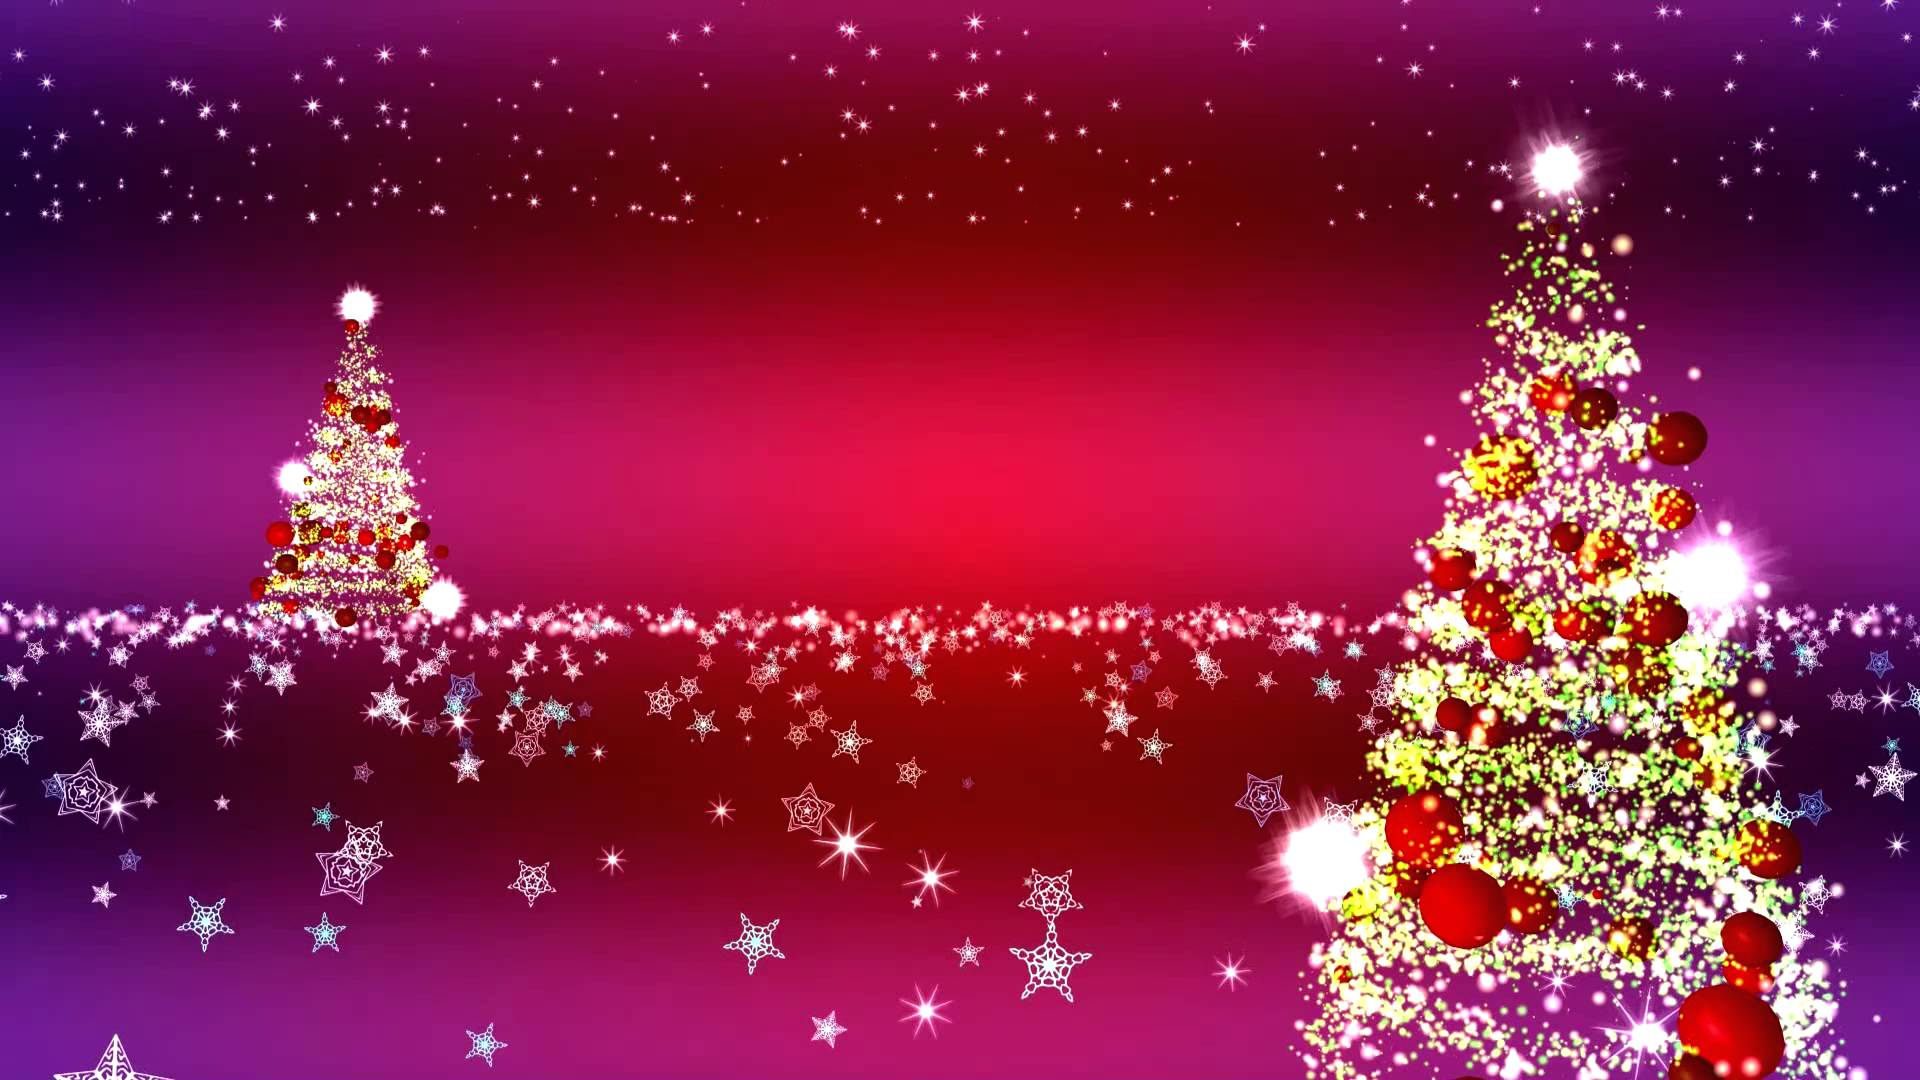 2015 Christmas background hd   wallpapers images photos